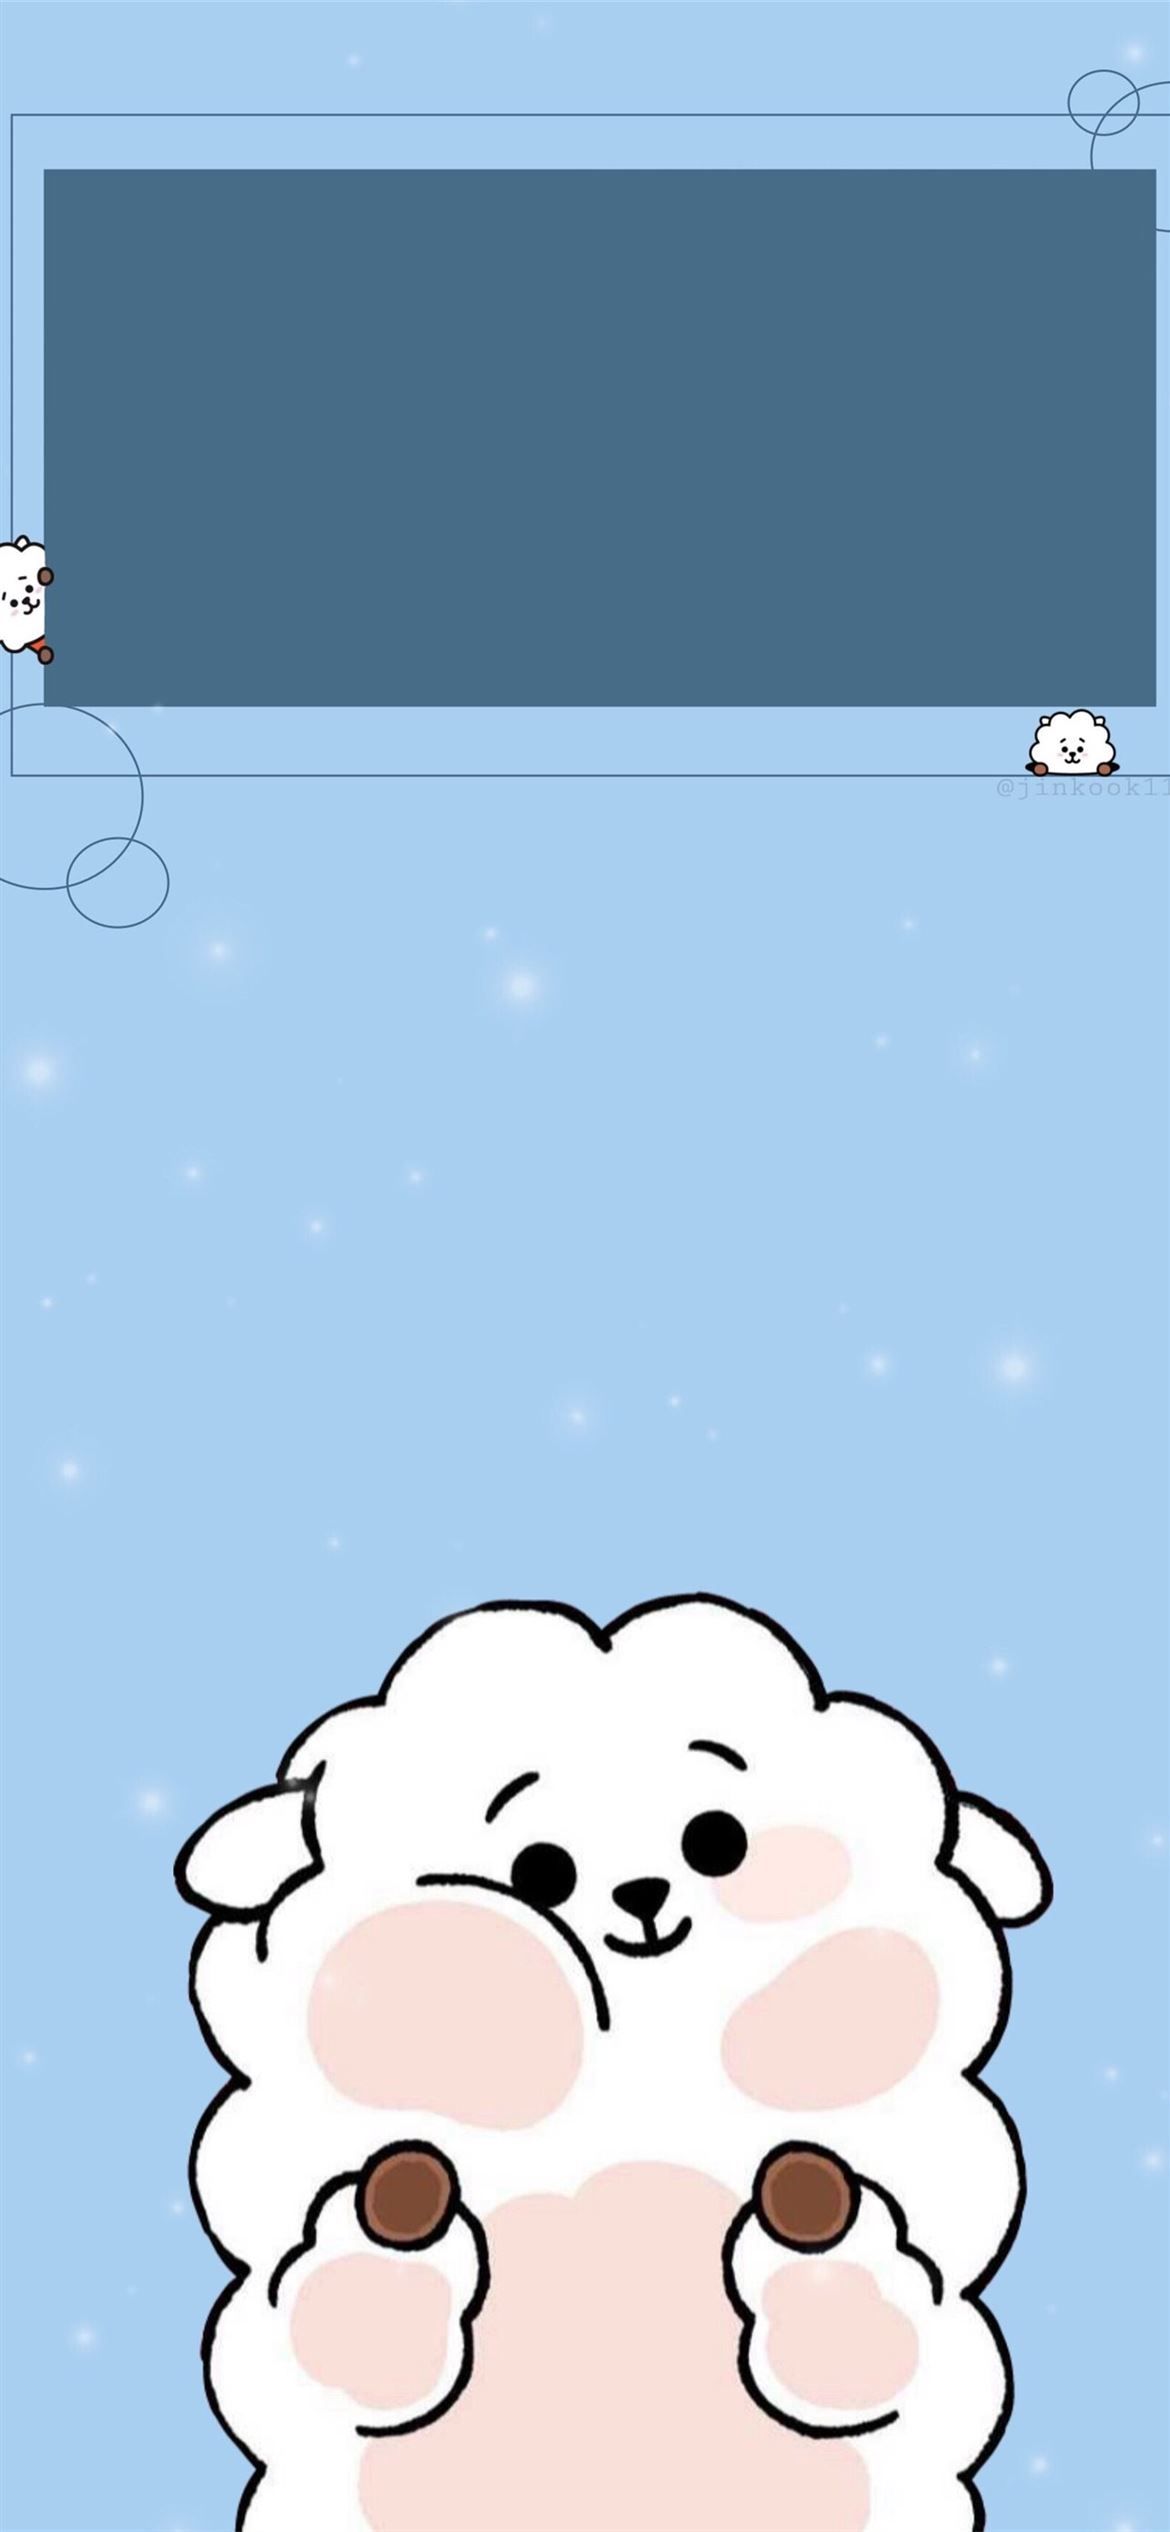 A sheep in the snow - BT21